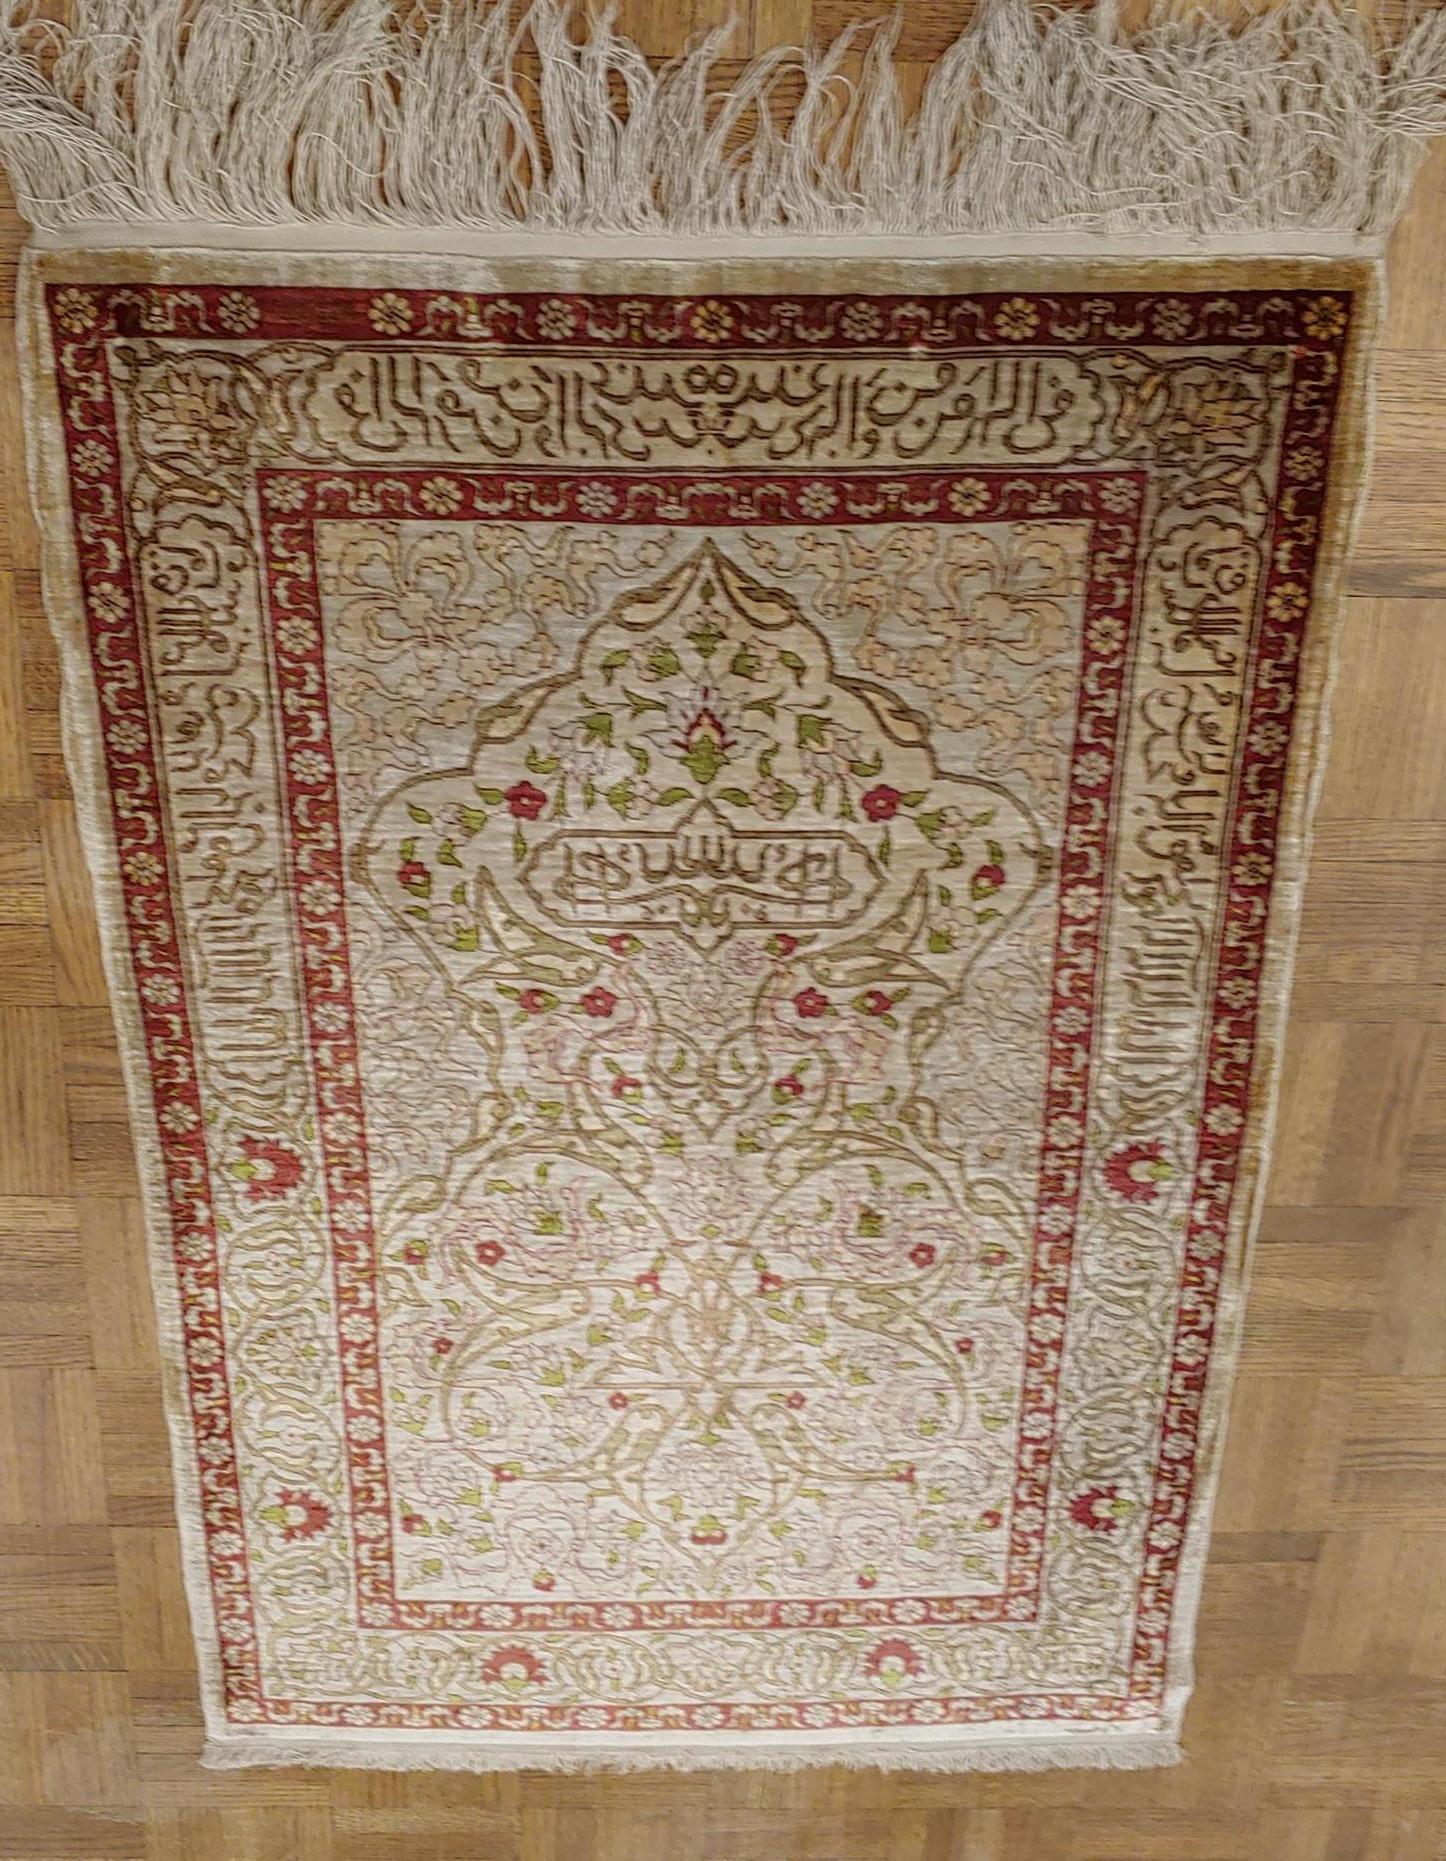 This is a spectacular example of a signed silk Turkish Hereke with around 800 knots per square inch. The design is an all-over floral motif on an ivory field. The pile is silk and the warp and weft are also silk. It is also decorated with metallic